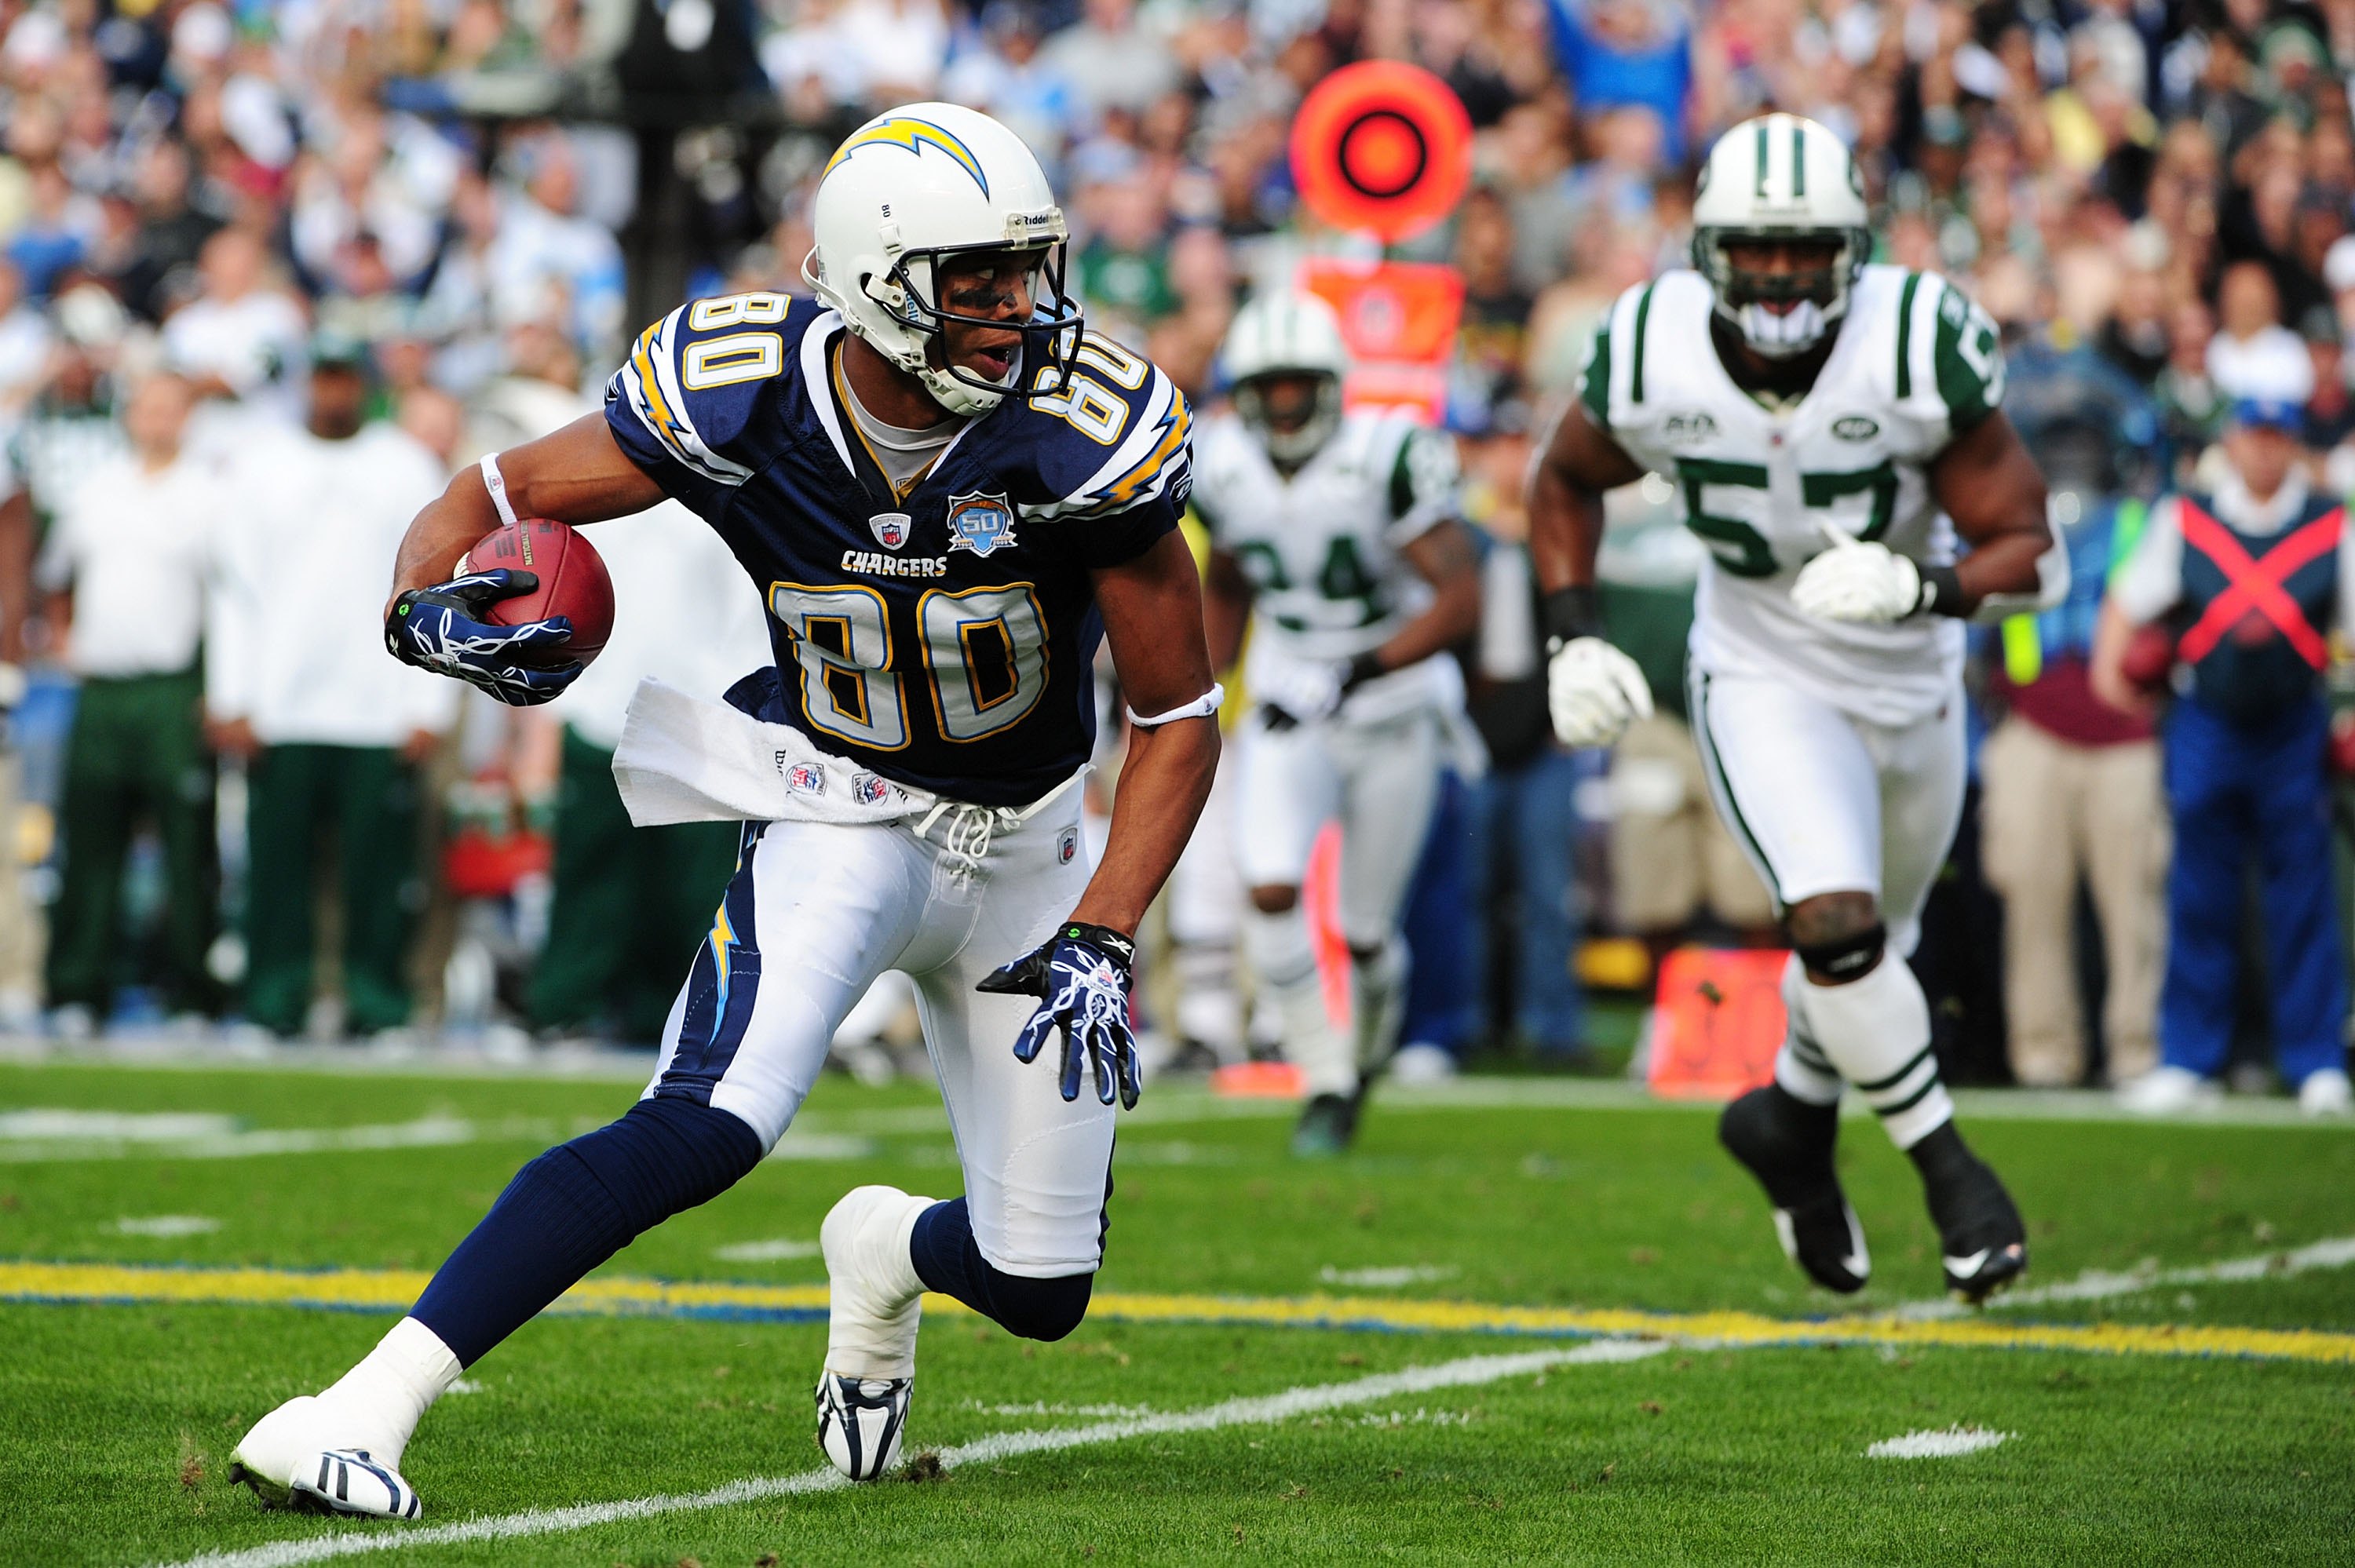 SAN DIEGO - JANUARY 17:  Wide receiver Malcom Floyd #80 of the San Diego Chargers runs with the ball after a catch against the New York Jets during  AFC Divisional Playoff Game at Qualcomm Stadium on January 17, 2010 in San Diego, California.  (Photo by R